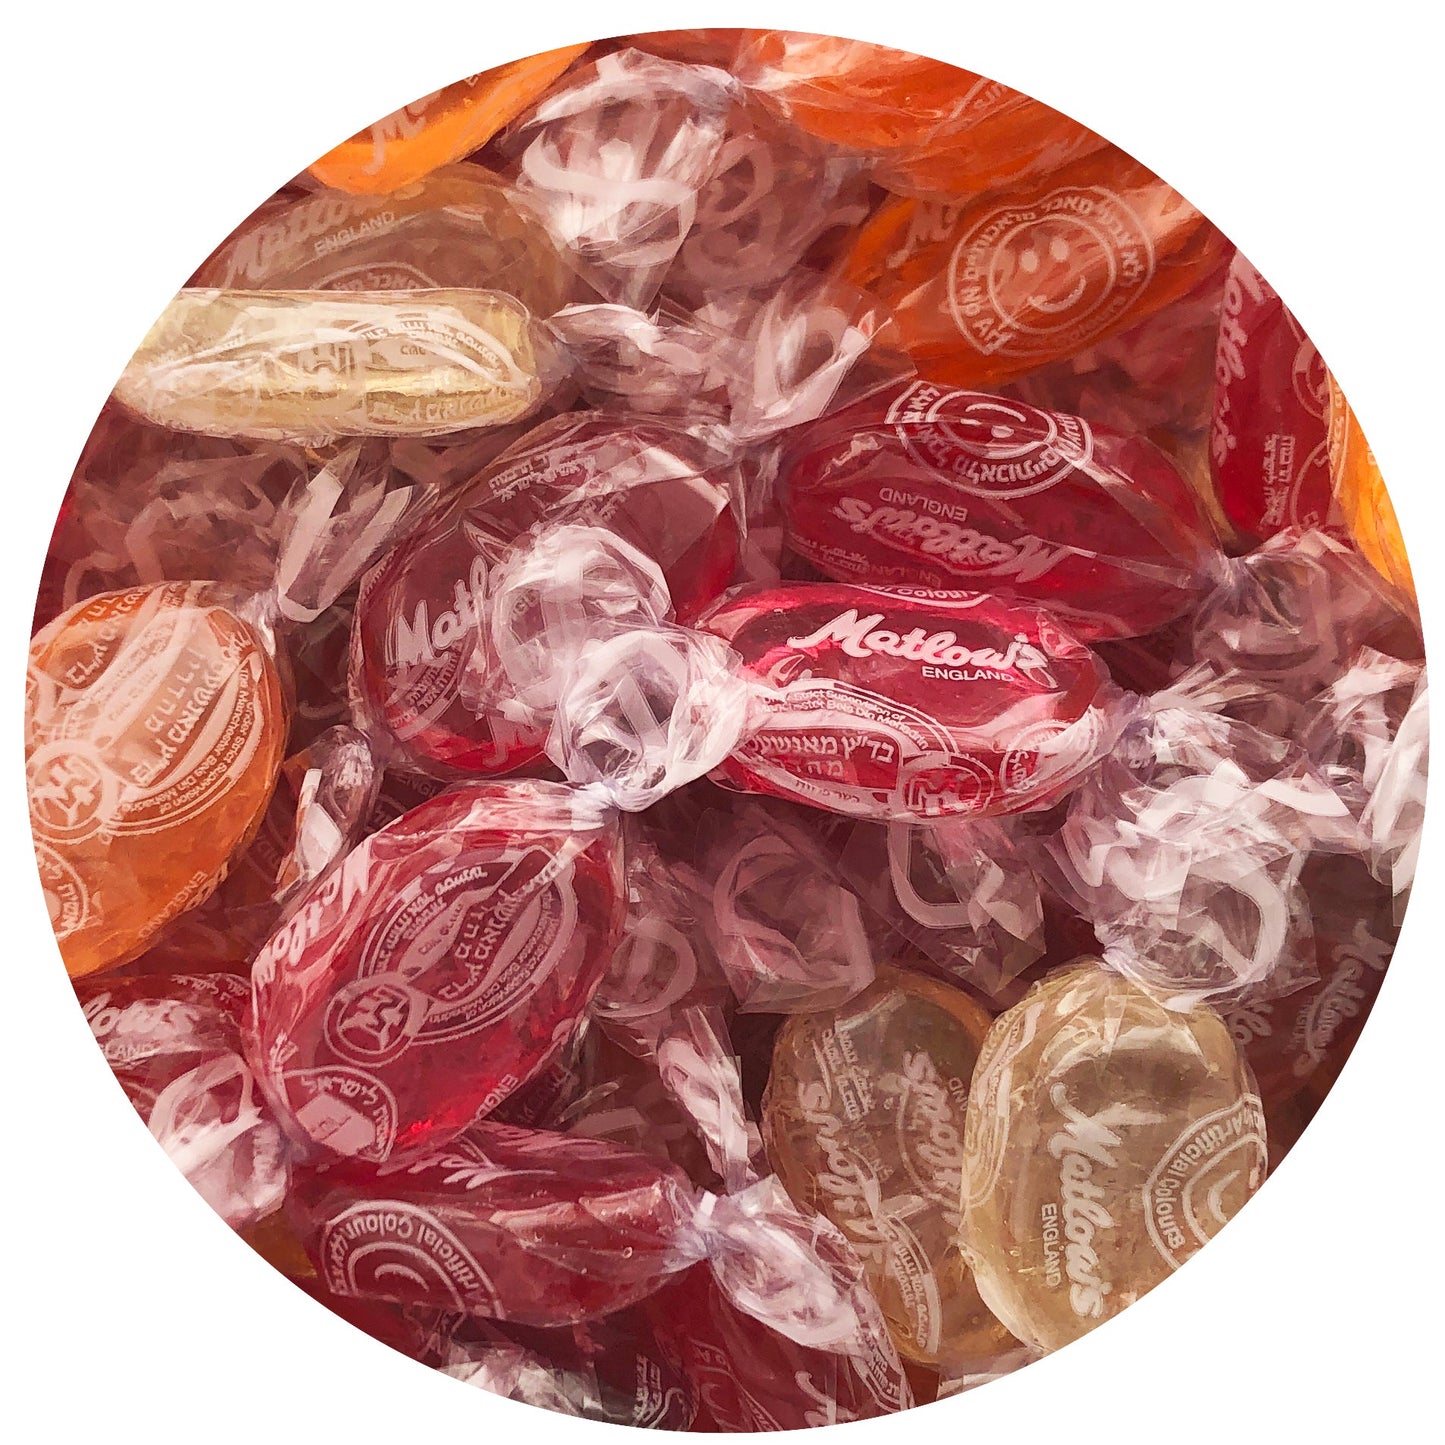 Matlow's Crystal Fruit Candy